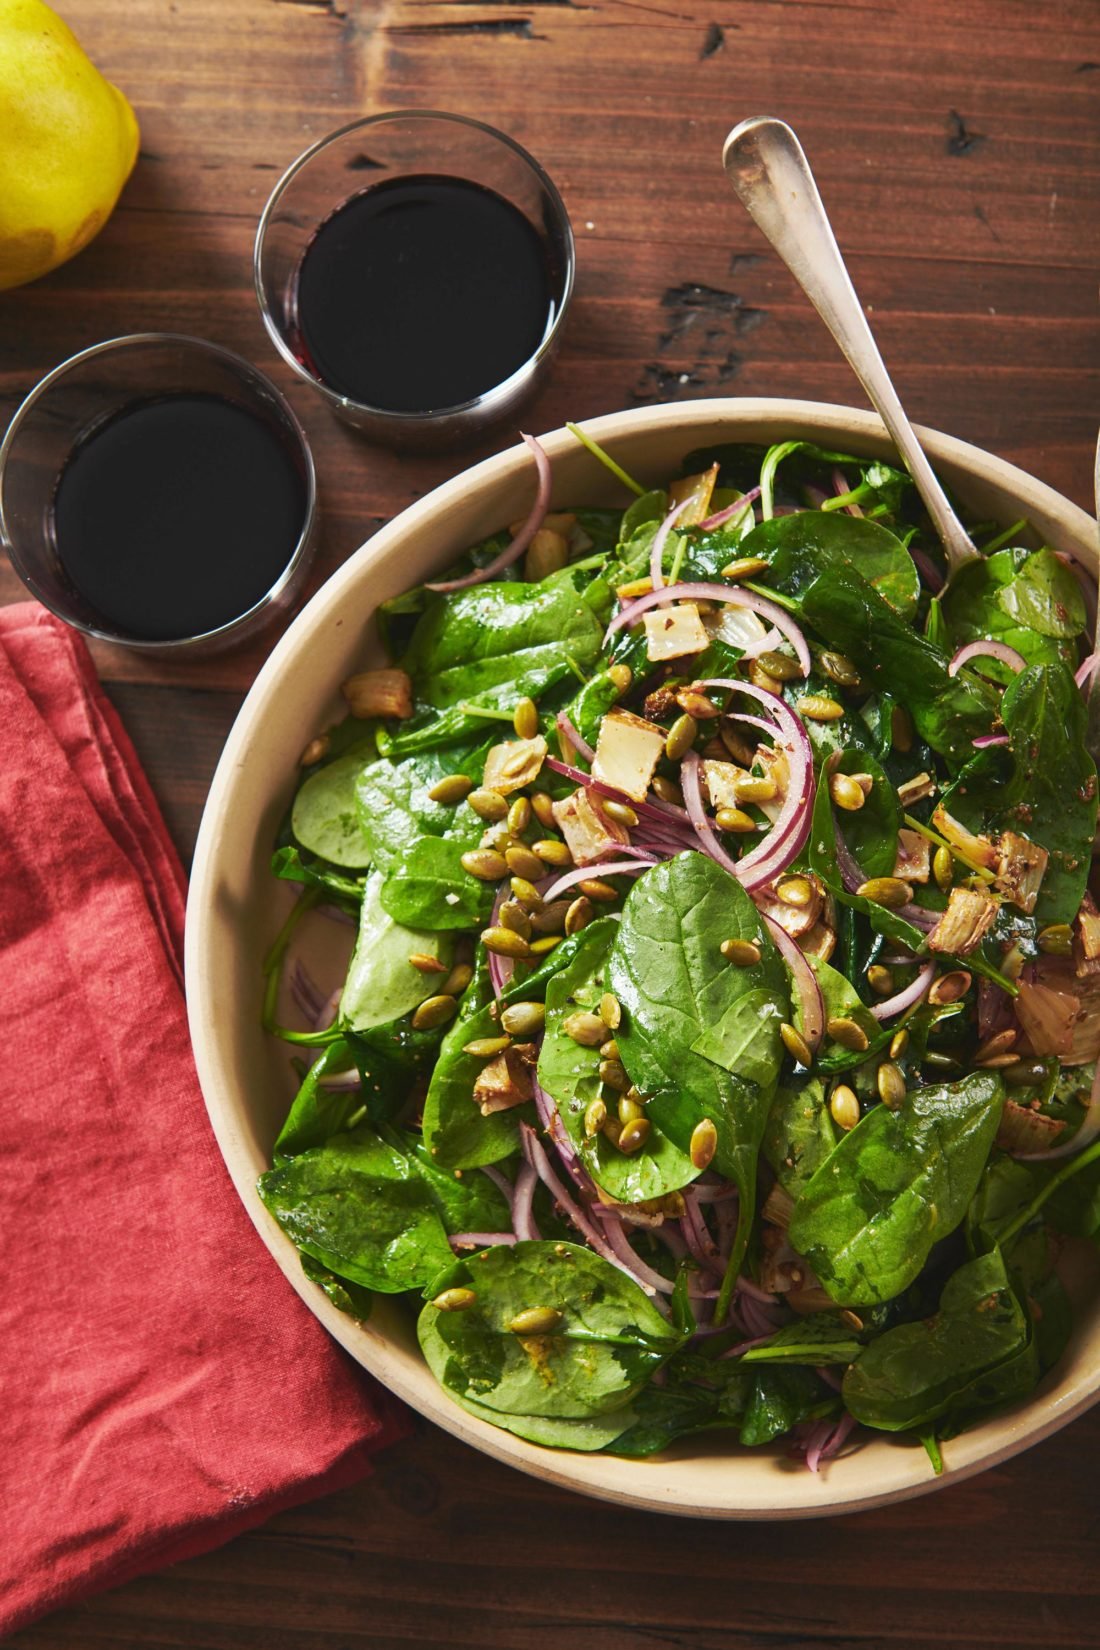 Spoon in a bowl of Spinach Salad with Roasted Fennel.